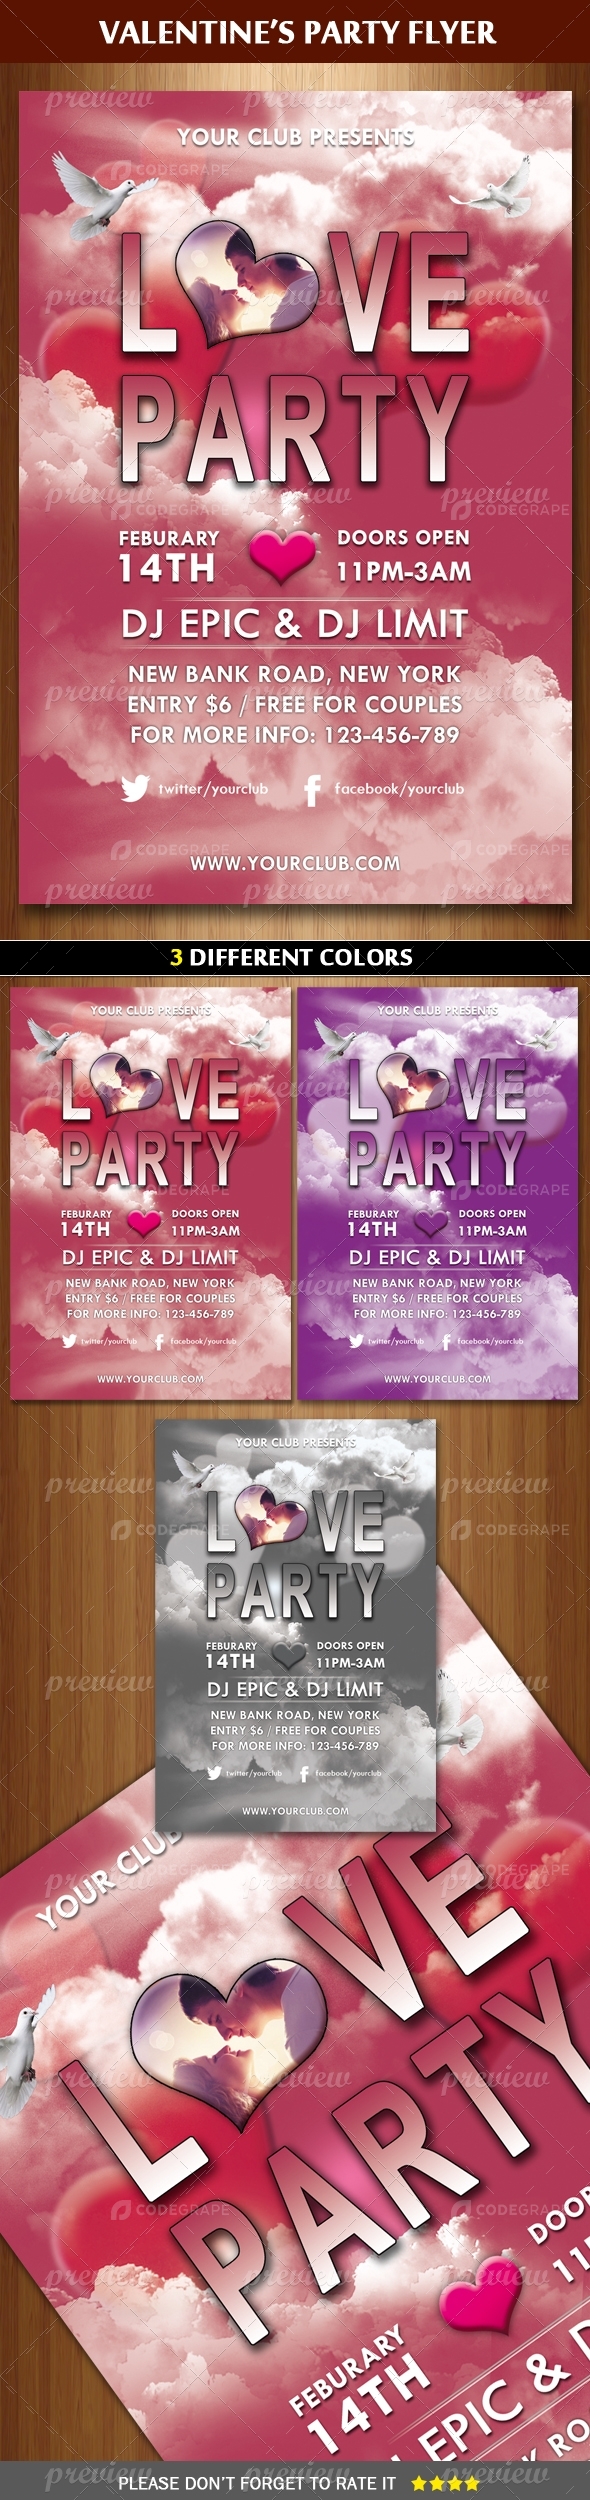 Valentine / Love Party Flyer Template